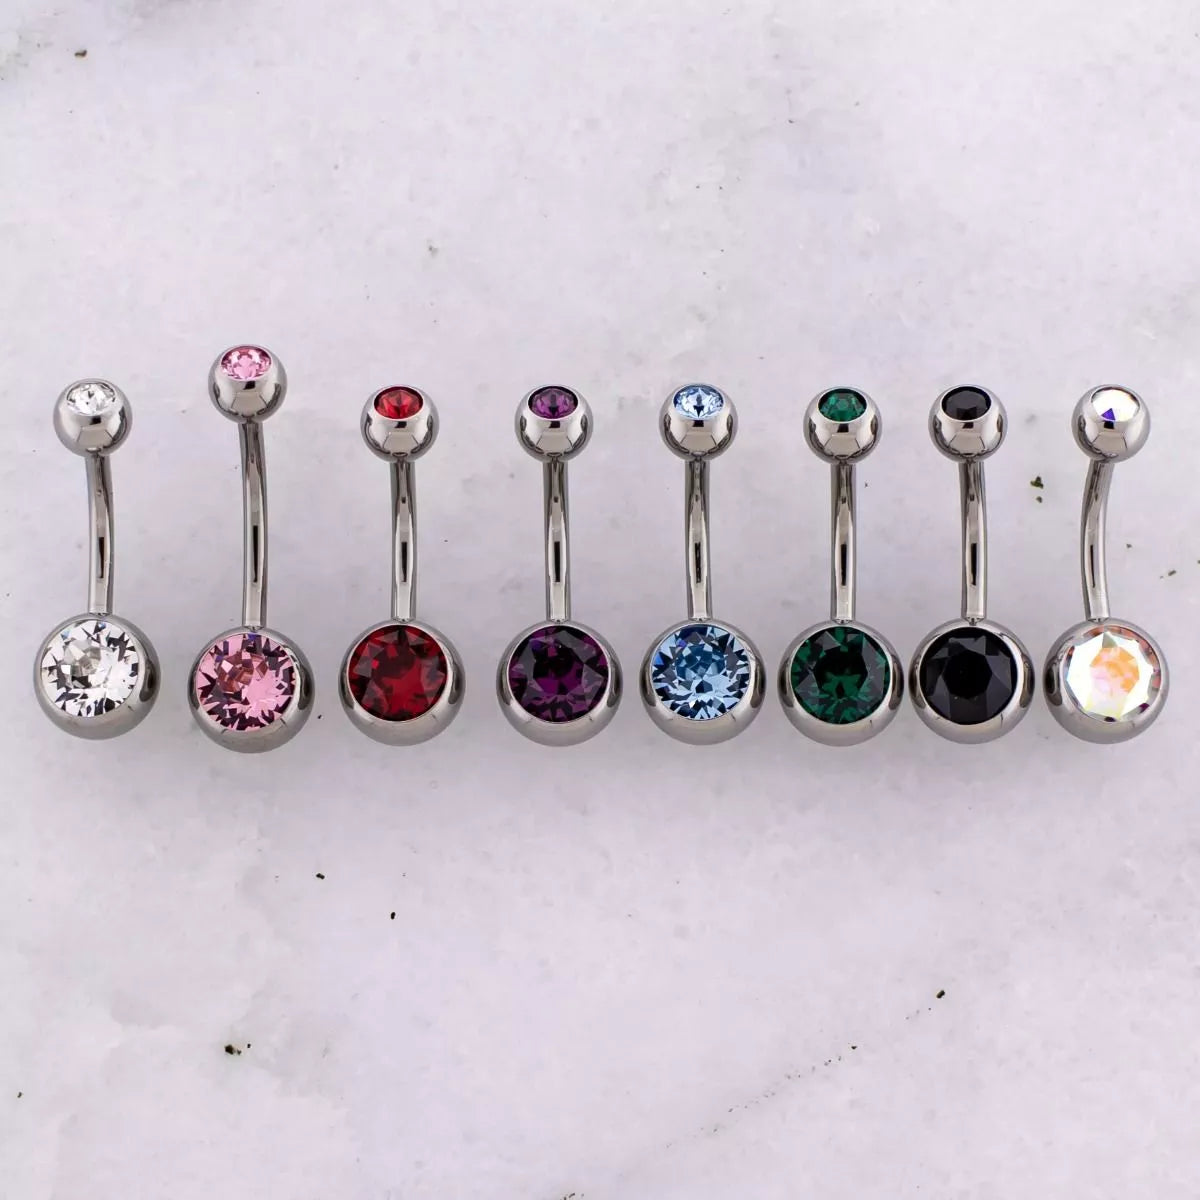 Belly Button Rings, Belly Button Jewelry